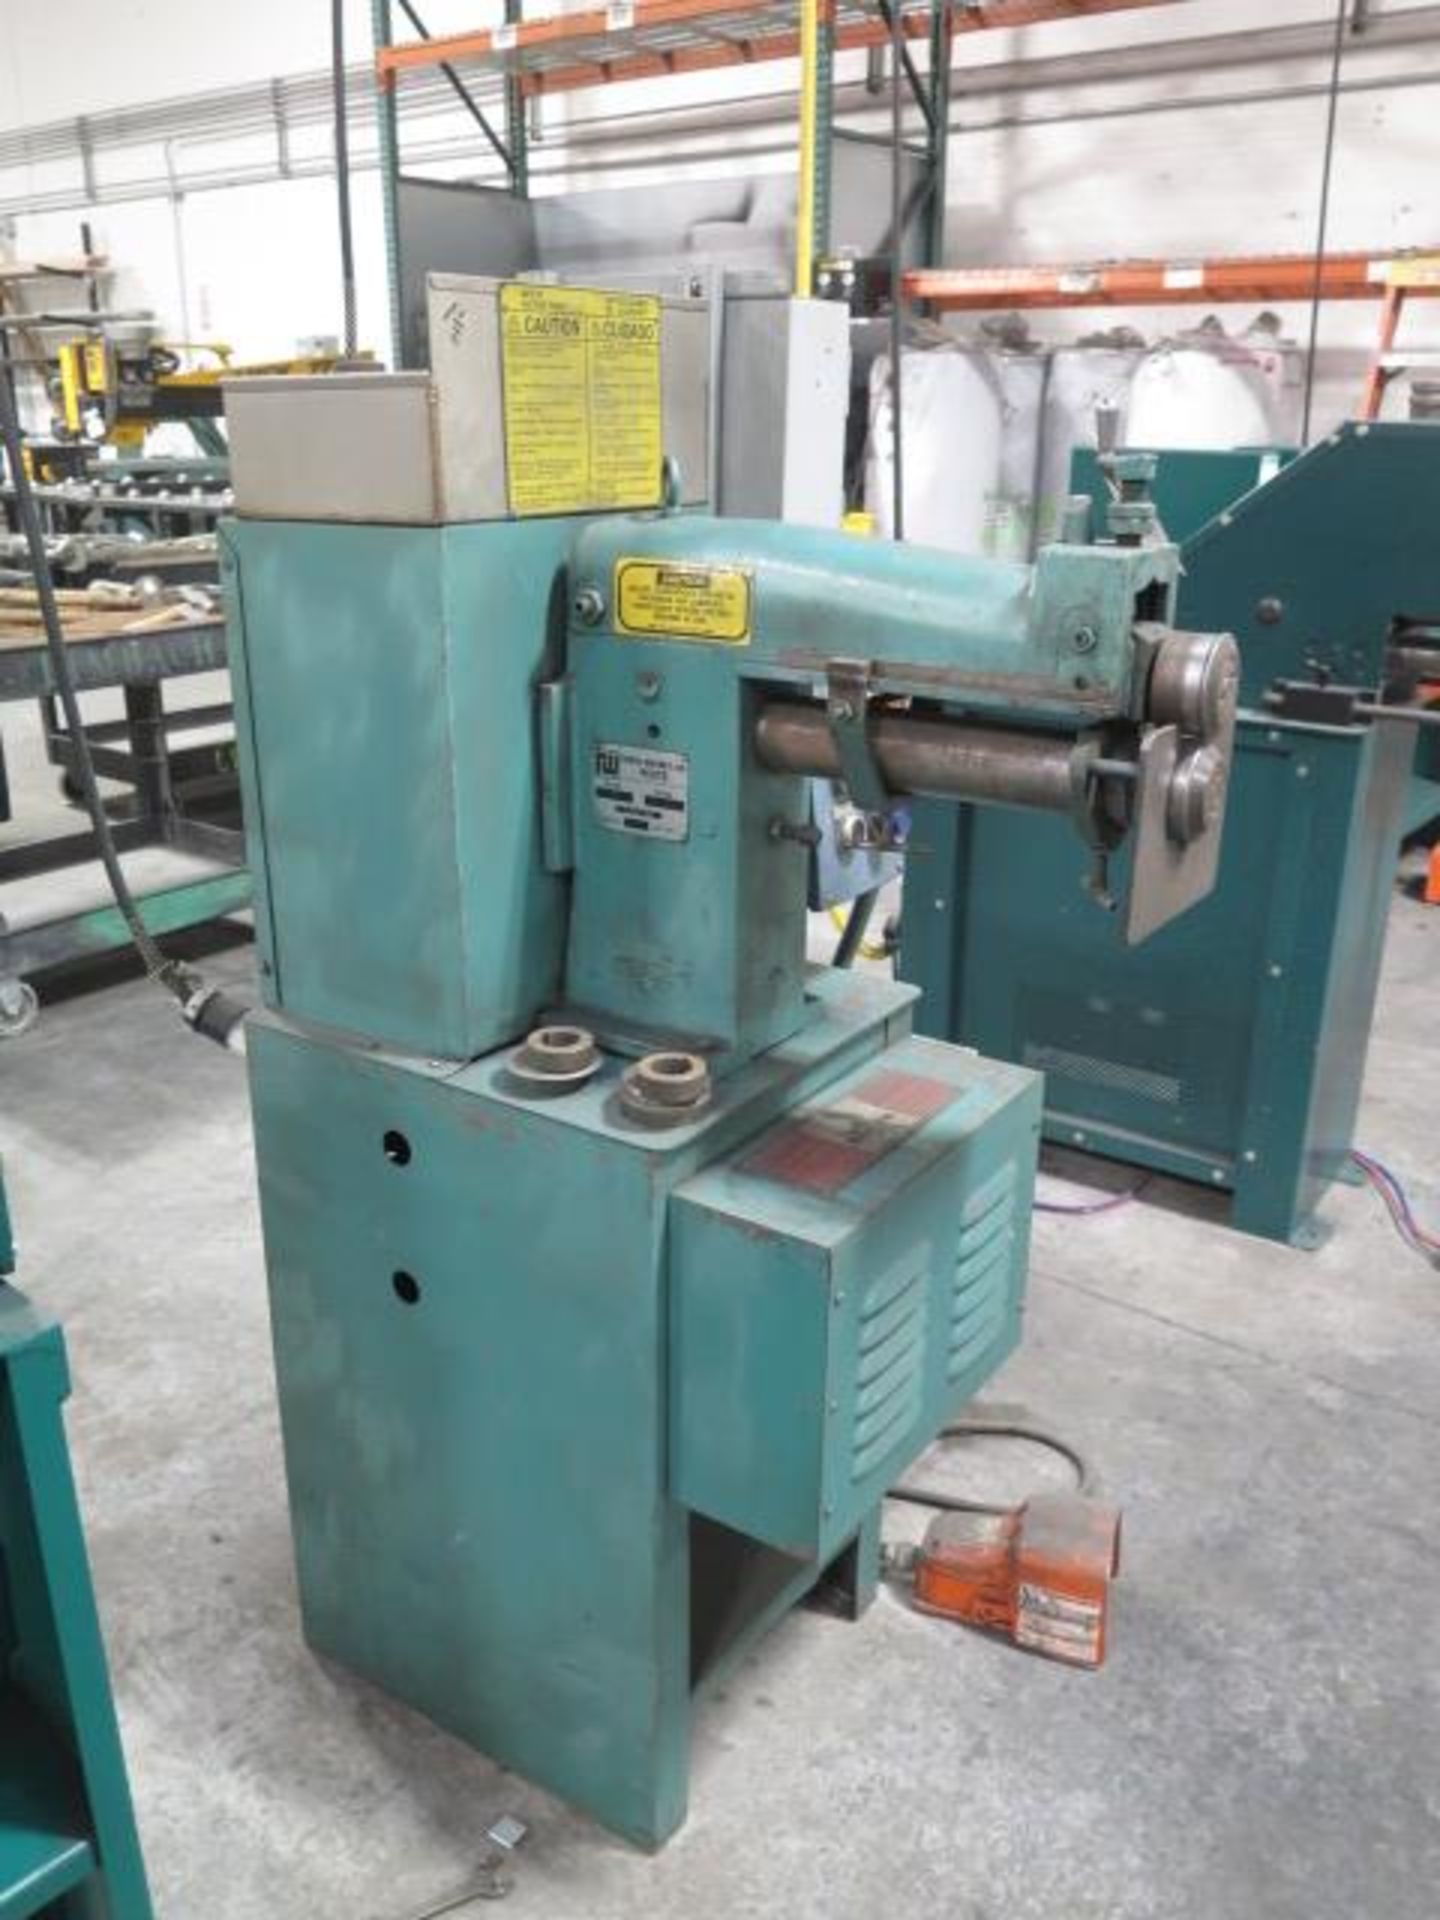 Pexto mdl. 3617 Power Beading/Crimping Machine s/n 1033-2-02 w/ 12" Throat, SOLD AS IS - Image 3 of 8